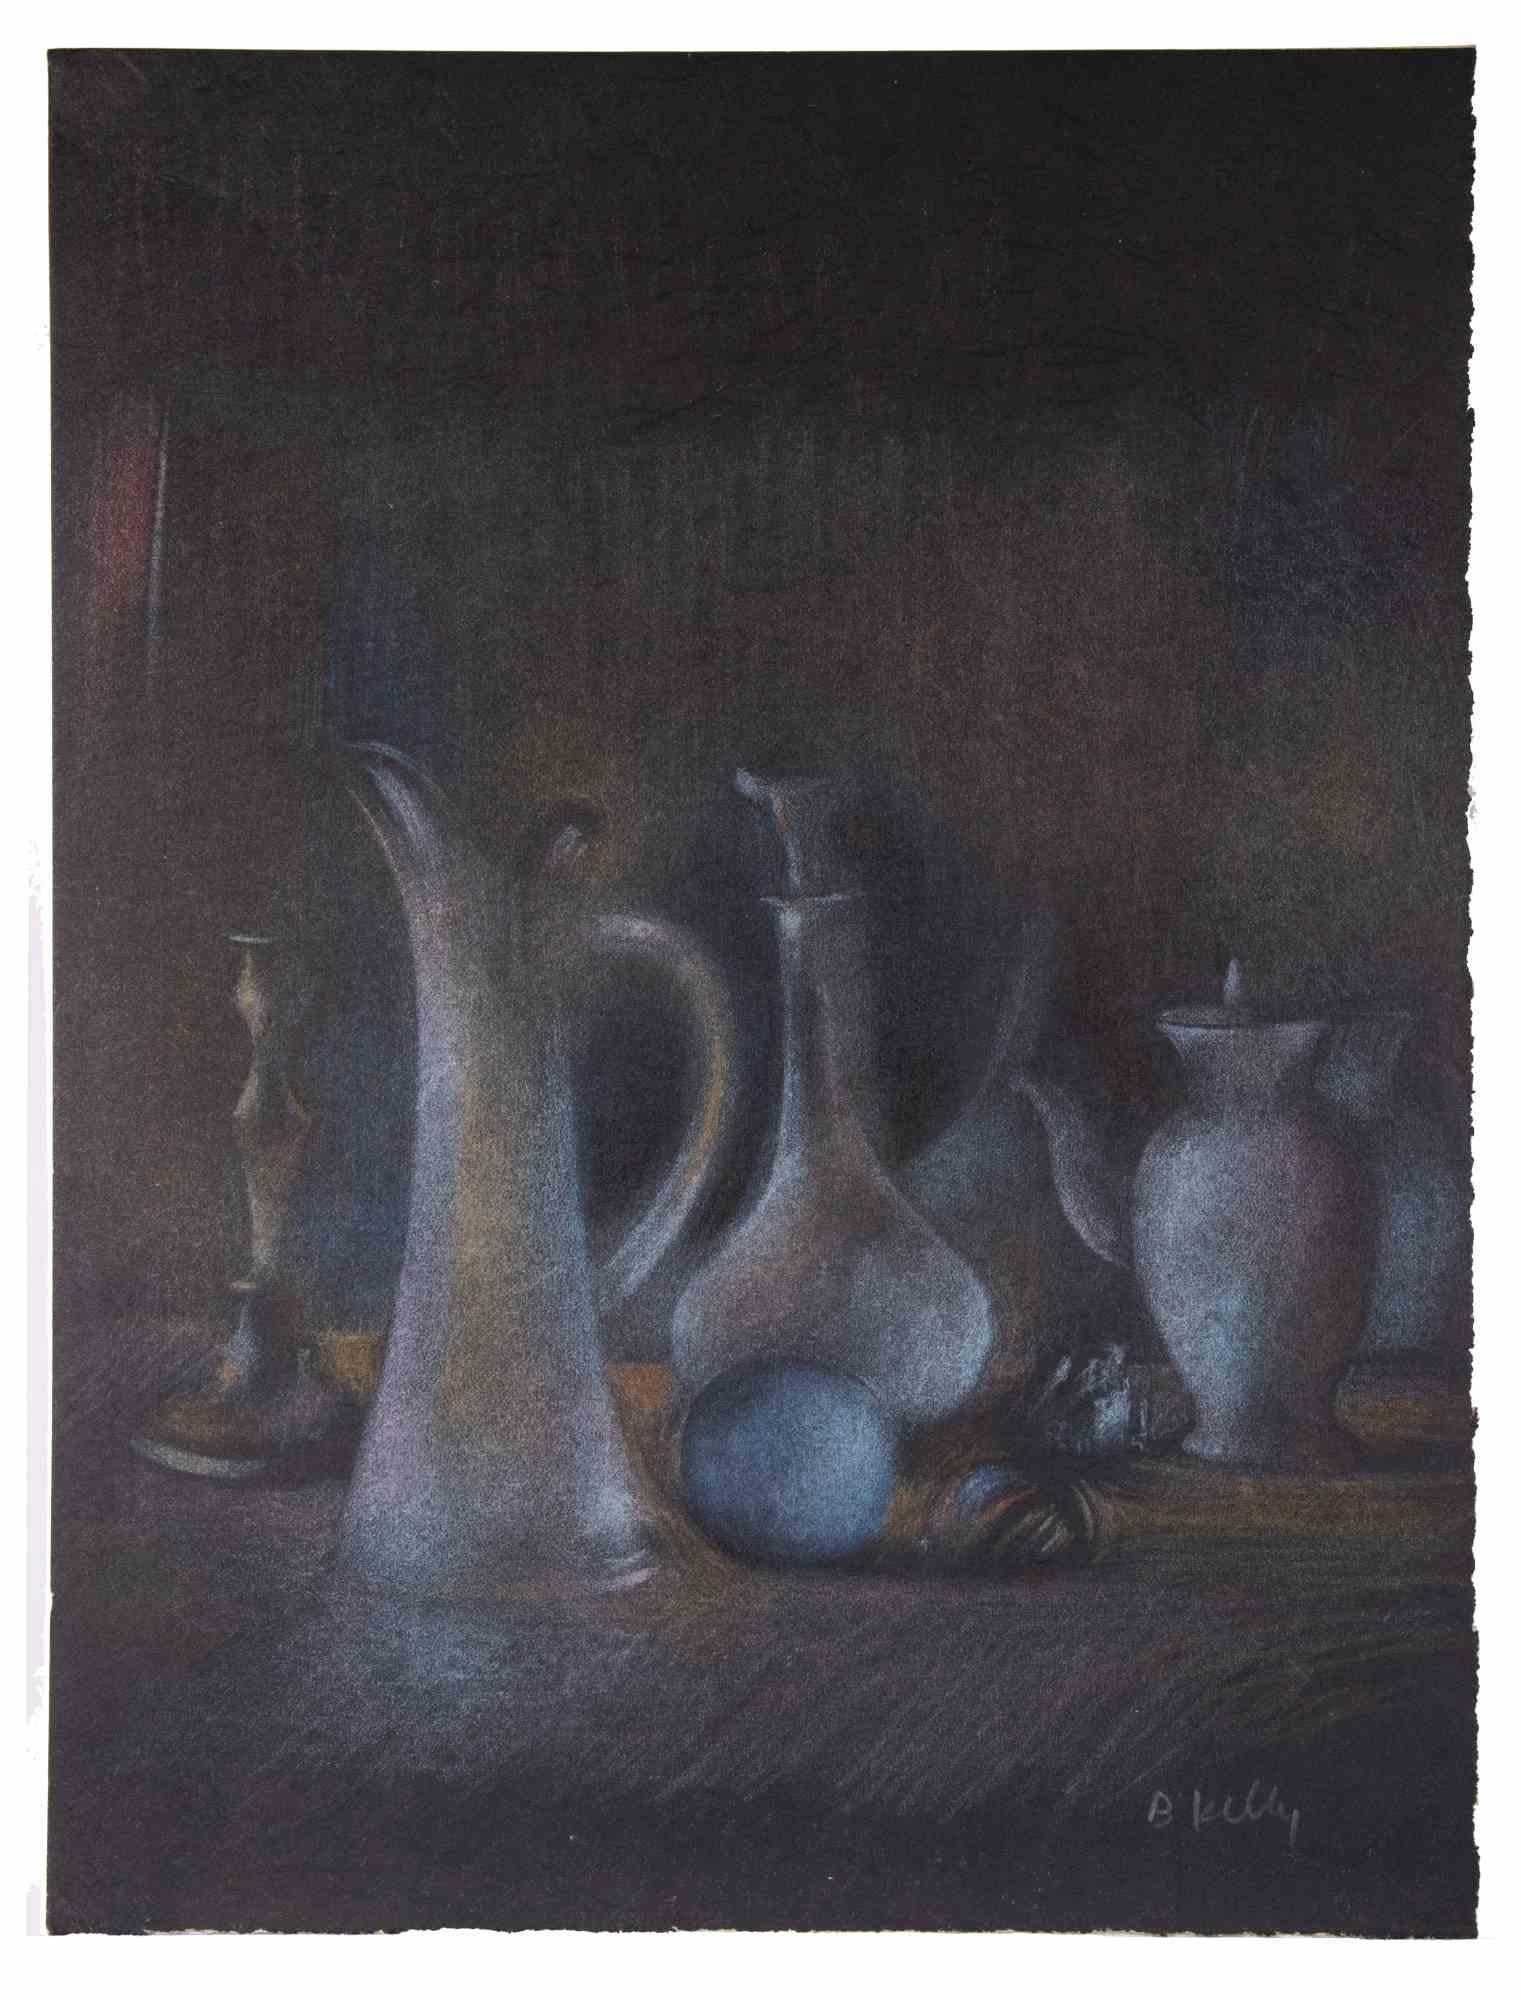 Still Life is an original mixed media, realized by Bernadette Kelly in about 1980 s. Hand signed on the lower right margin

The artist depicts  an intimate still life scene. Few elements, simple lines marked by the succession of warm tones.

Good